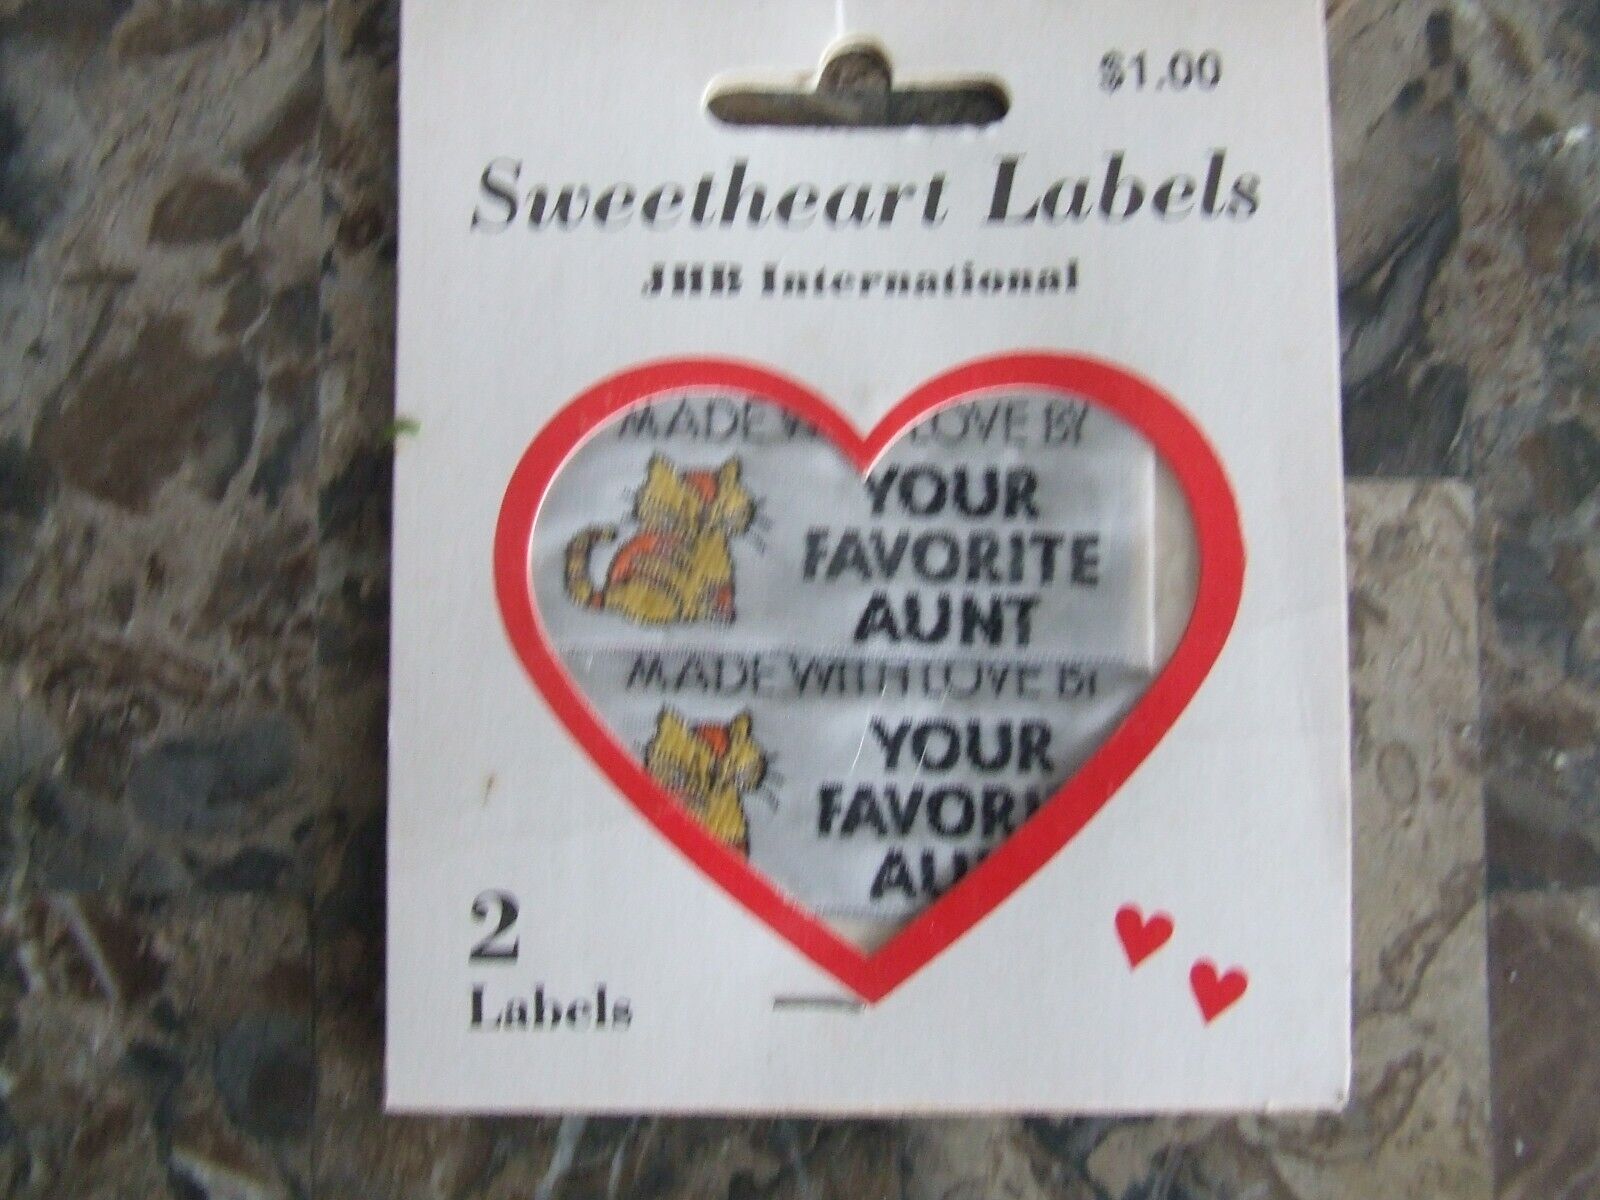 Vintage Woven Sew In Labels Made With Love By Your Favorite Aunt NIP By JHB Int.